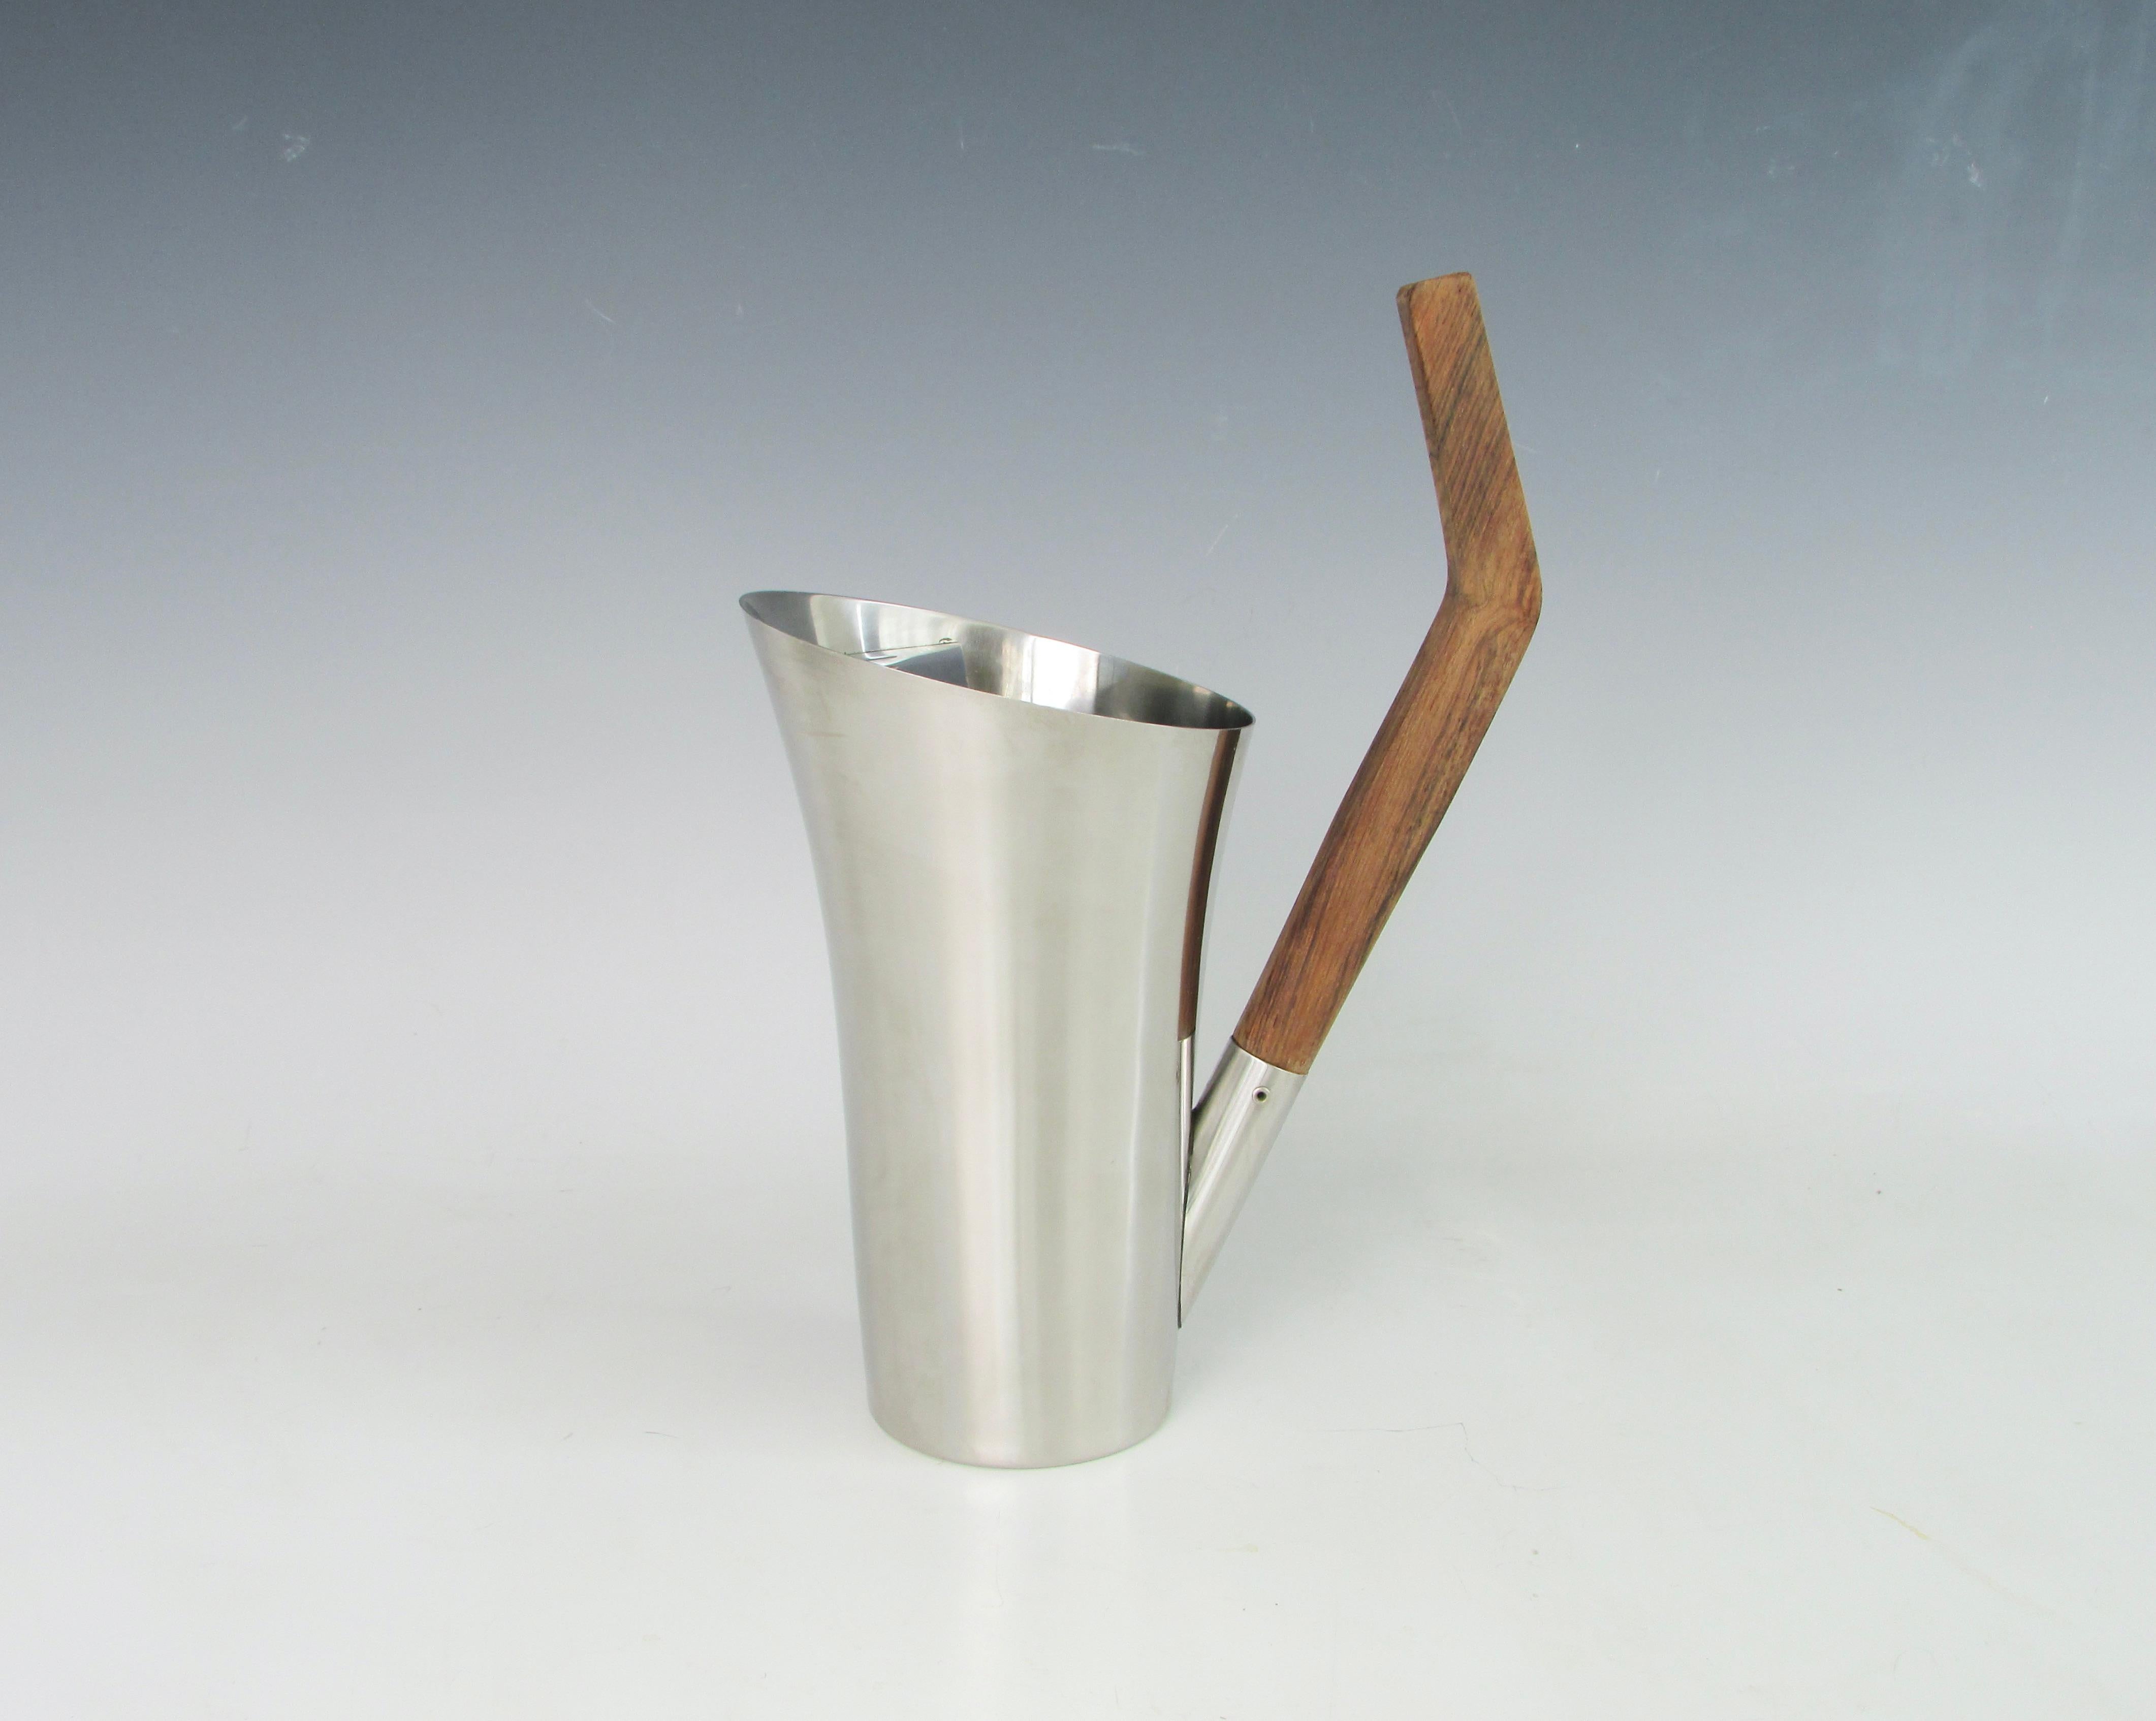 Stylish asymmetrically styled cocktail pitcher. Solid rosewood handle attached to stainless steel body of pitcher. Narrow bottom flairs open at the top to internal Ice strainer. Measures ten inches to top of handle pitcher itself is 7